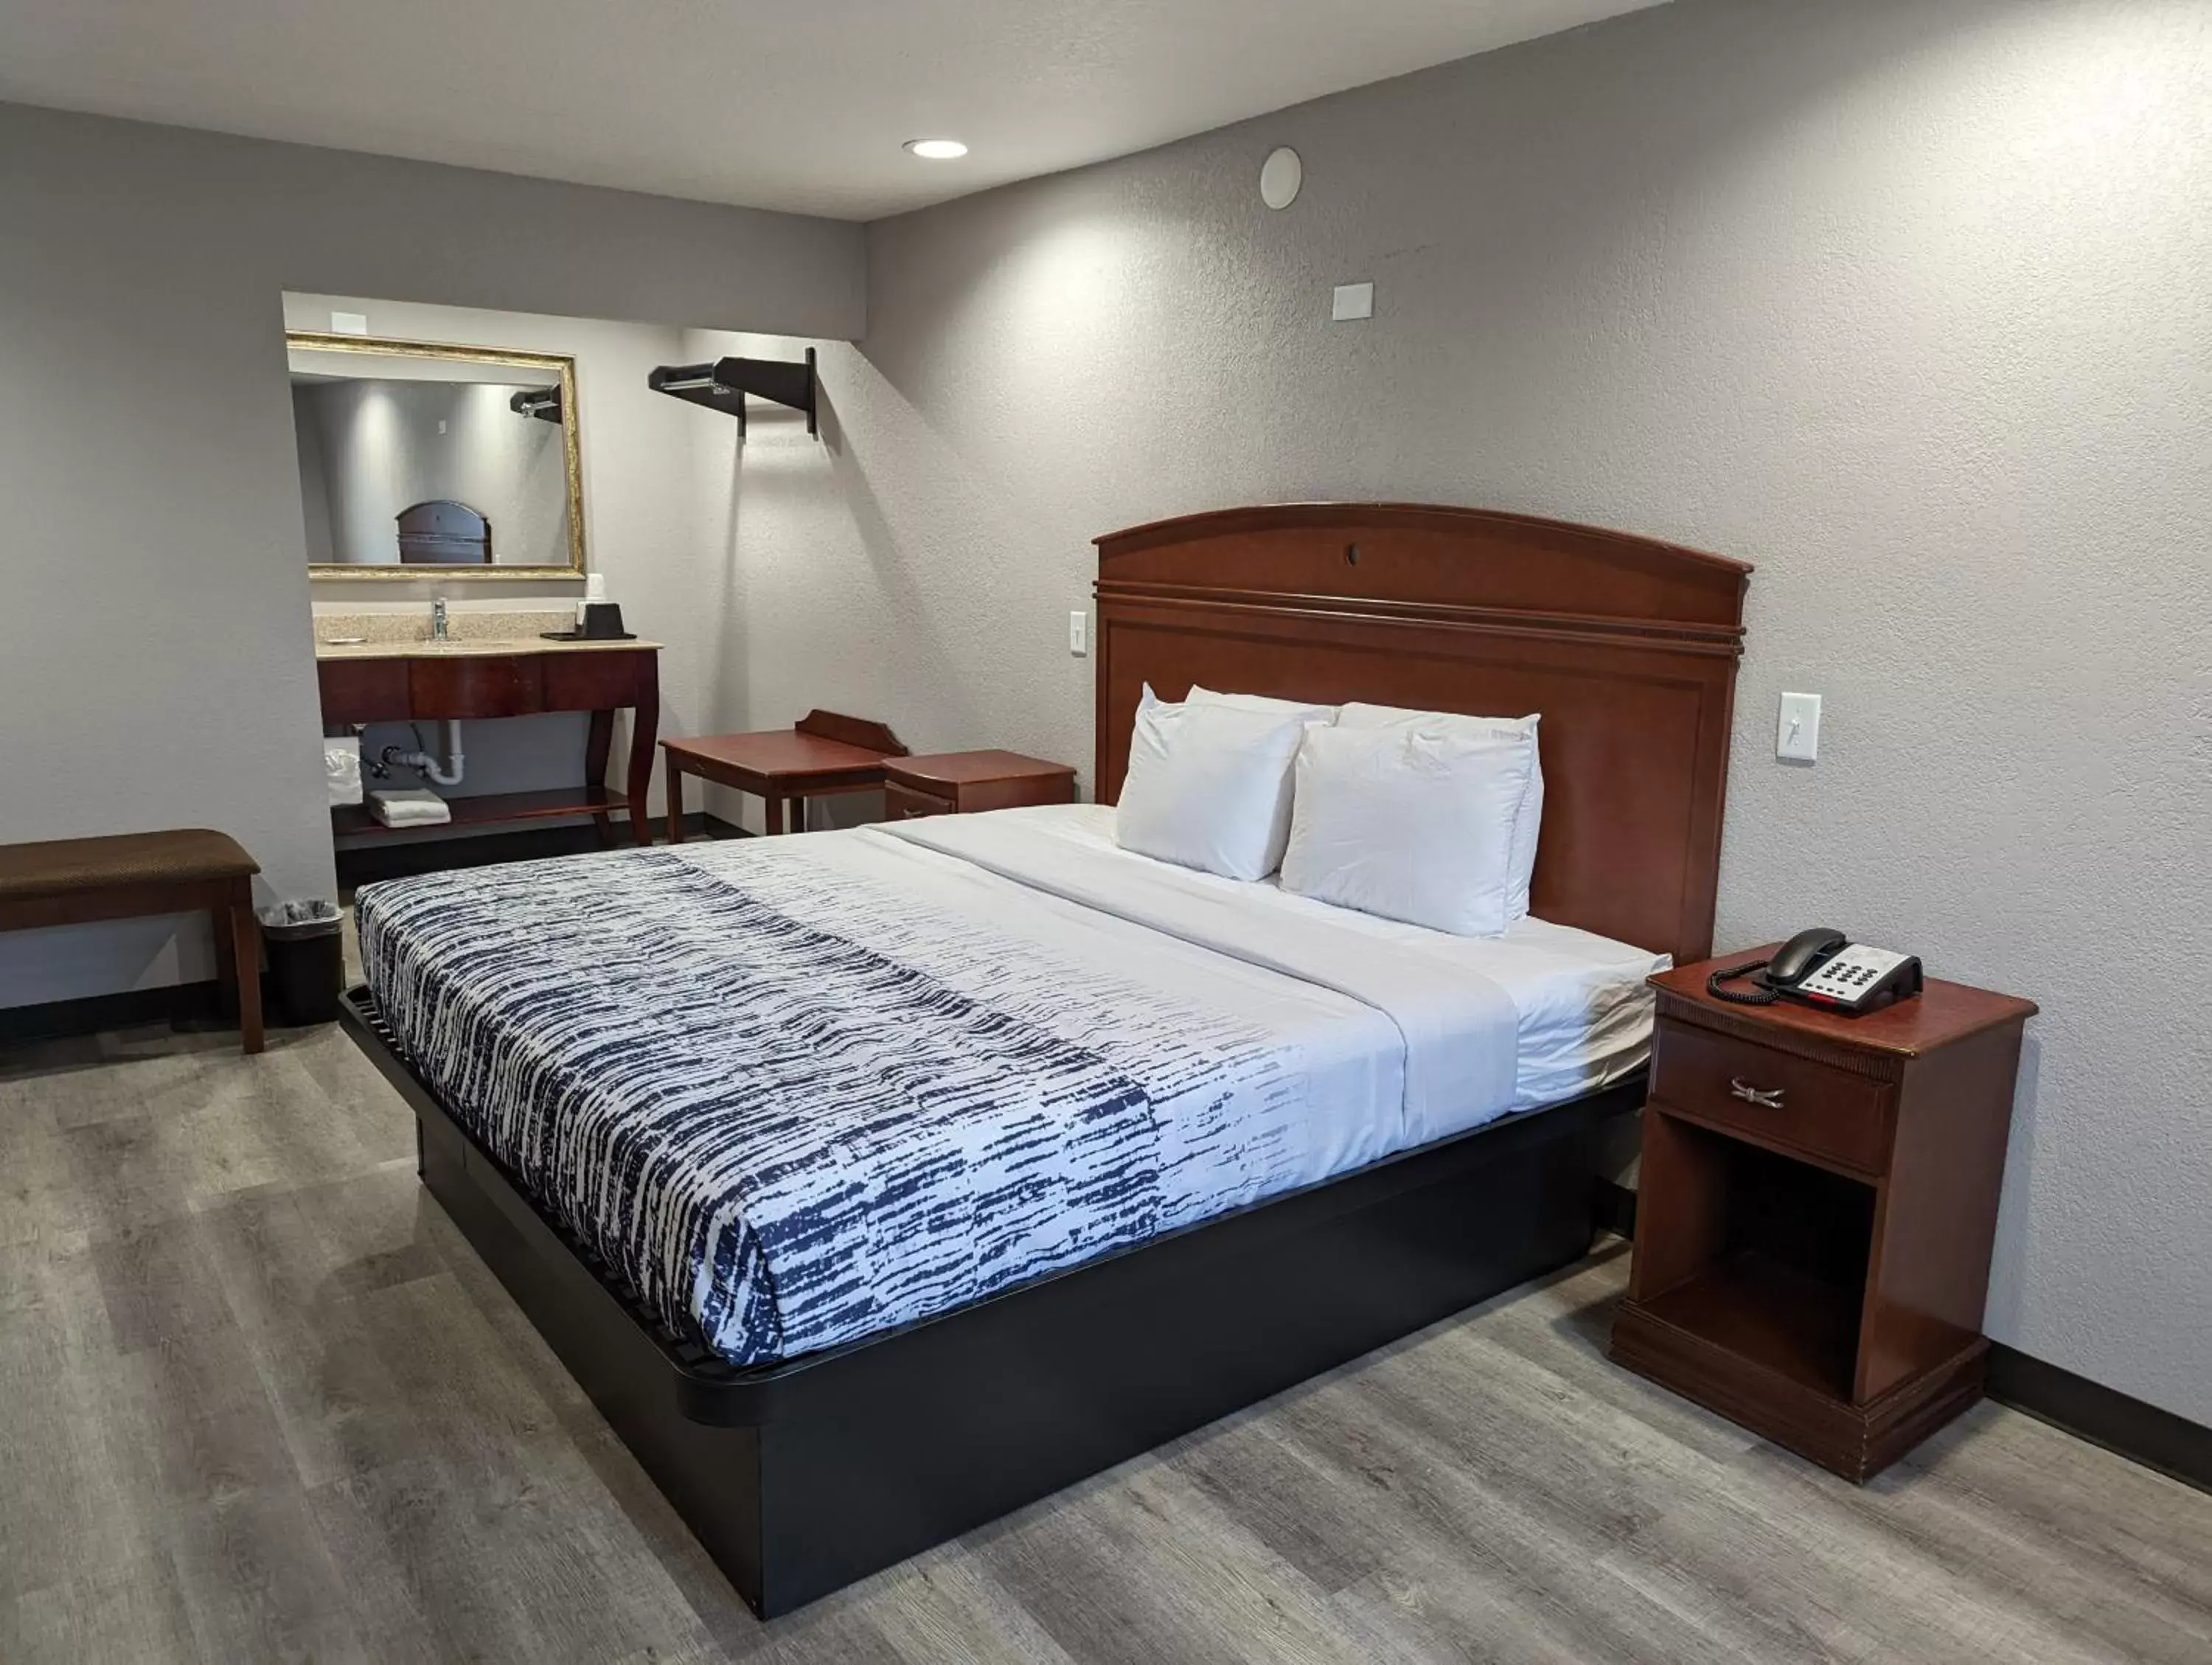 Property building, Bed in OKC Hotel